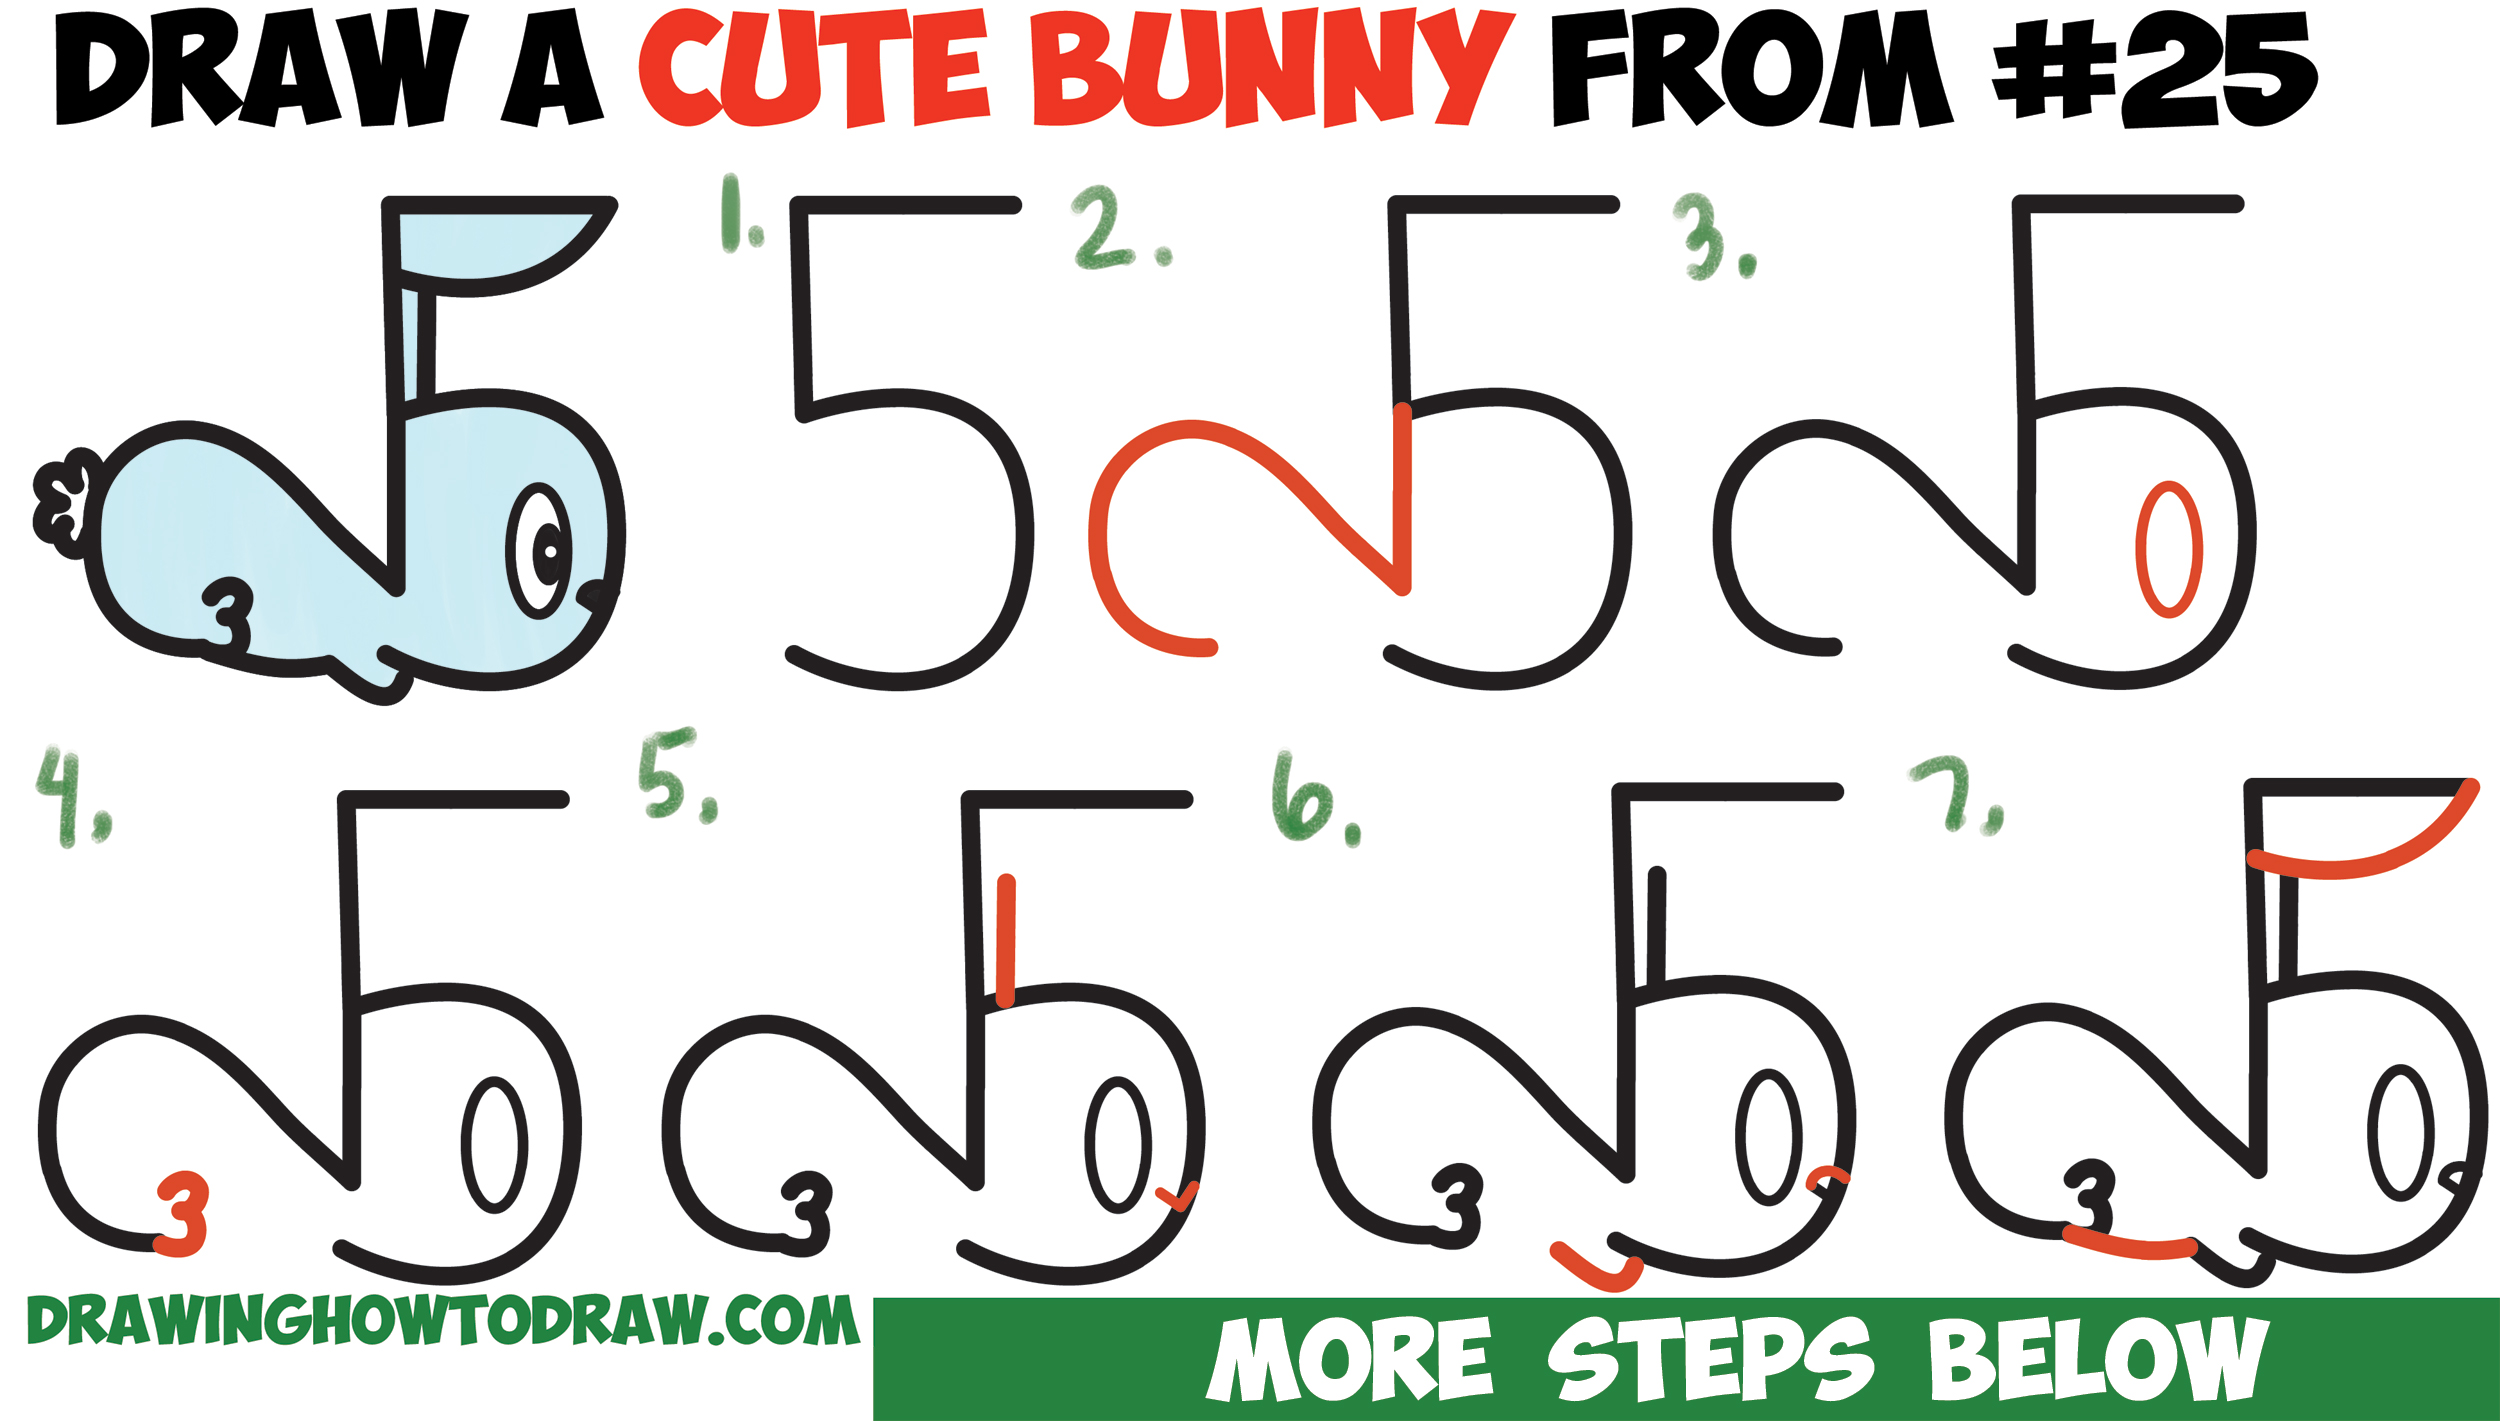 How to Draw a Cute Cartoon Bunny Rabbit from Numbers 25 Easy Step by